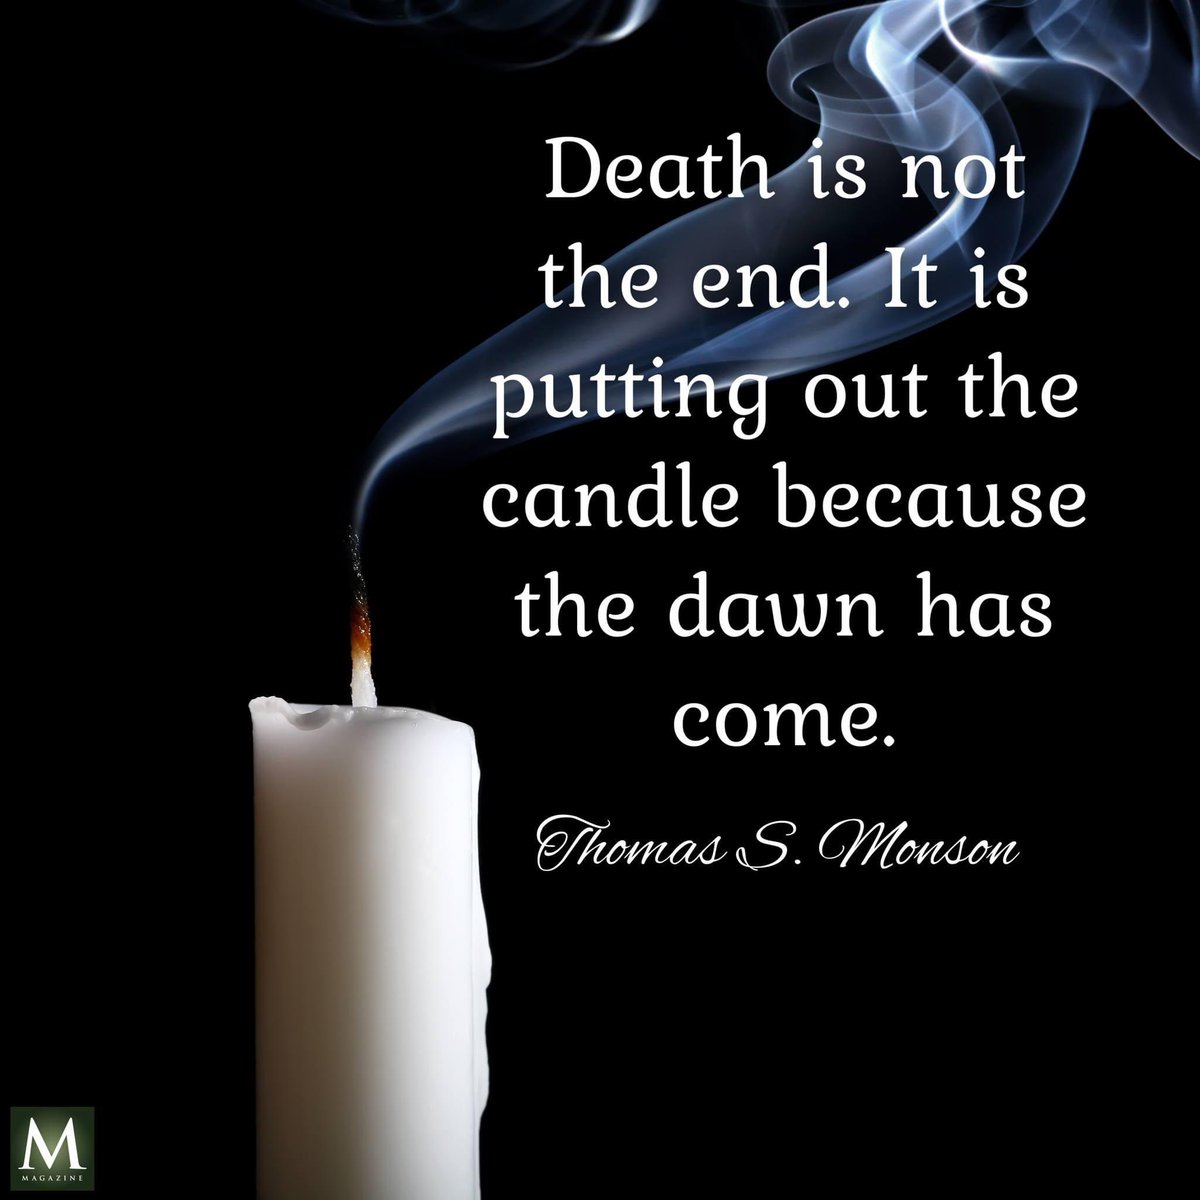 'Death is not the end.  It is putting out the candle because the dawn has come.' ~ President Thomas S. Monson

#TrustGod #CountOnHim #WordOfGod #HearHim #ComeUntoChrist #ShareGoodness #ChildrenOfGod #GodLovesYou #TheChurchOfJesusChristOfLatterDaySaints